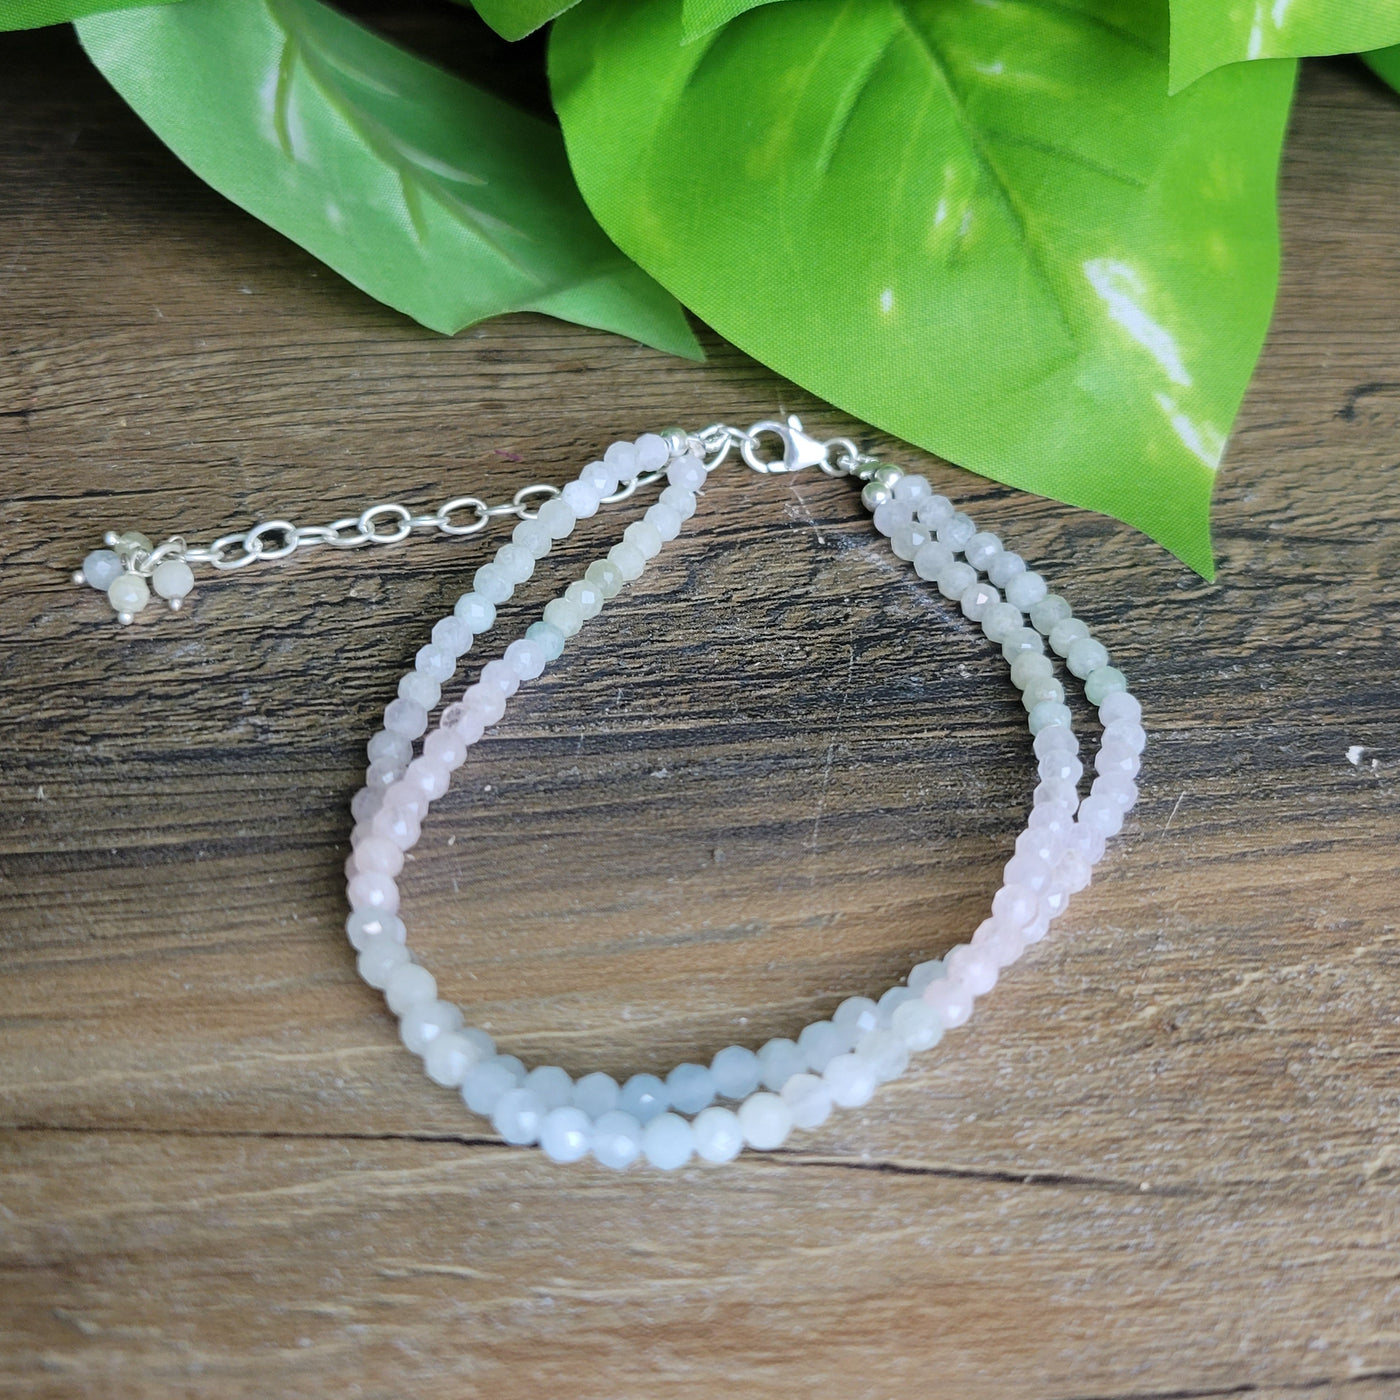 Aquamarine Beaded Double Strand Adjustable Bracelet or Anklet with Sterling Silver Clasp 7.75" to 9.5"